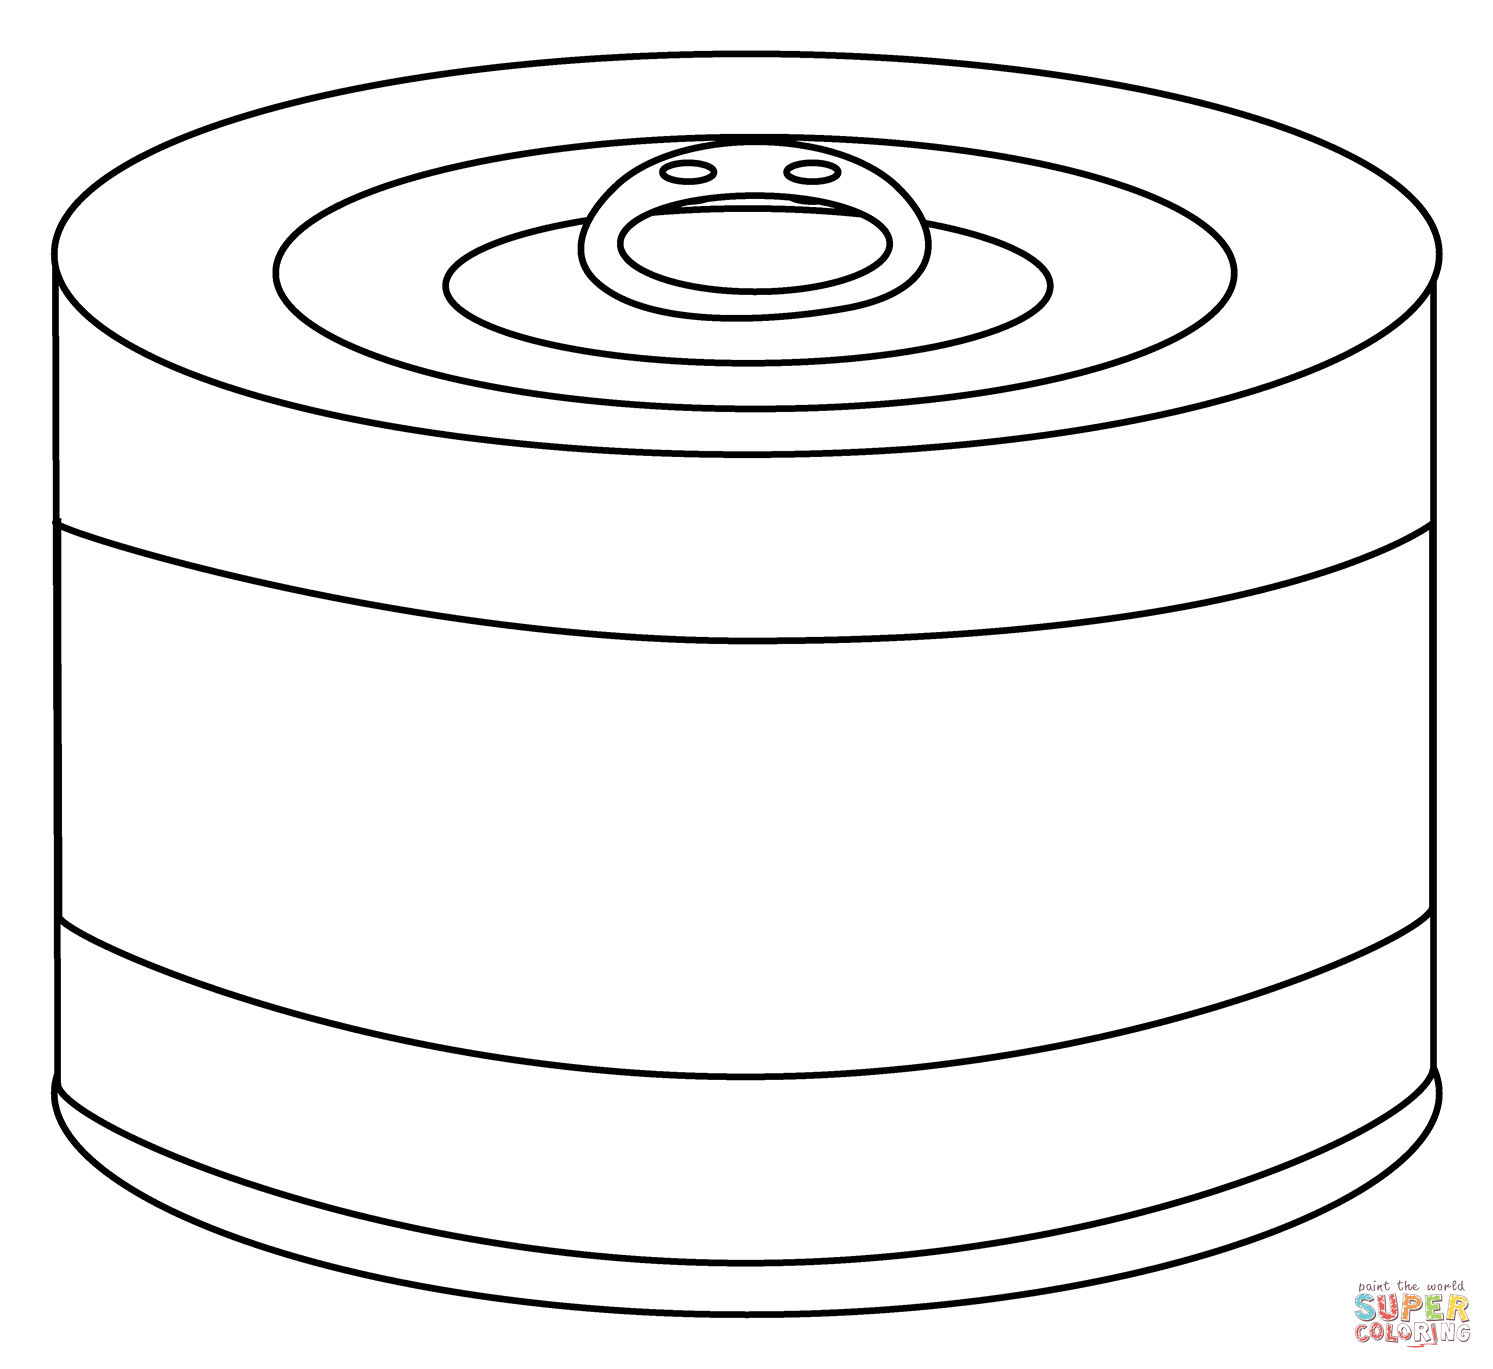 Canned food emoji coloring page free printable coloring pages